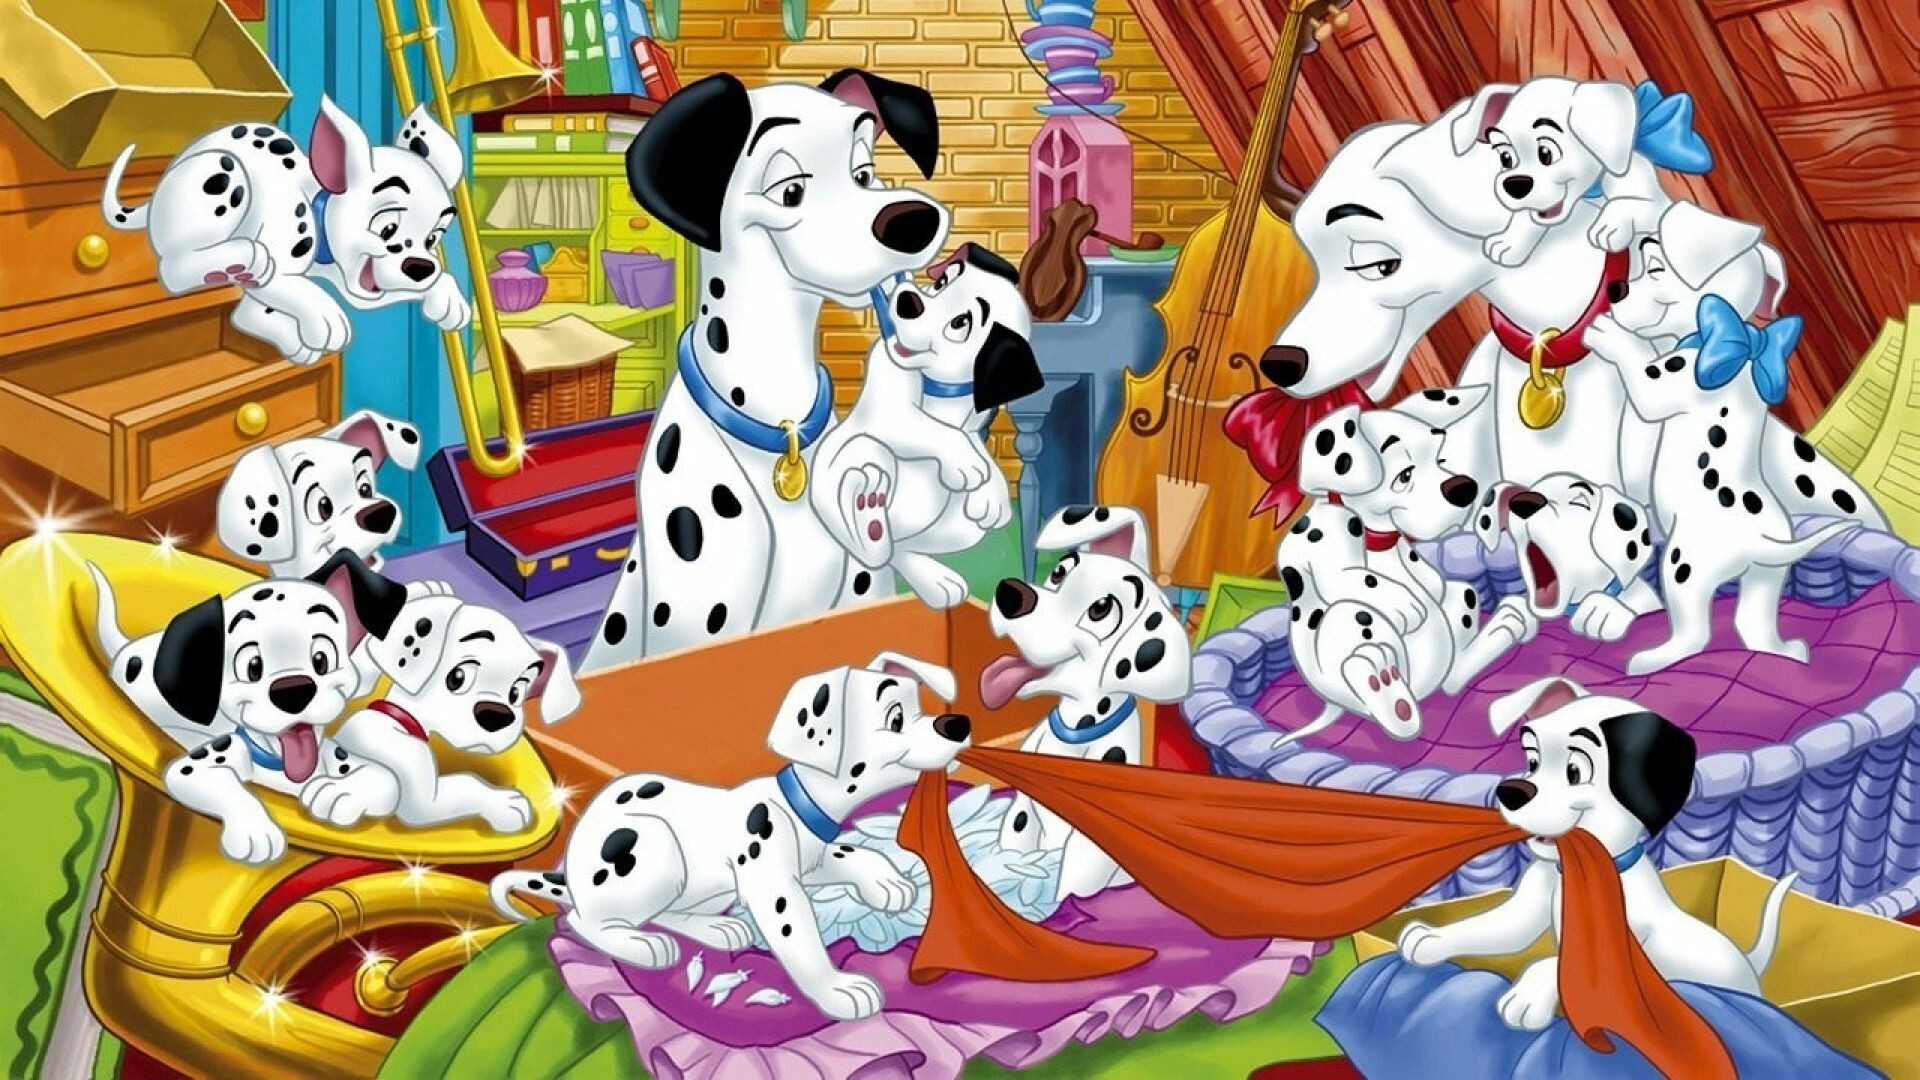 One Hundred and One Dalmatians: Based on the 1956 novel by Dodie Smith. 1920x1080 Full HD Wallpaper.